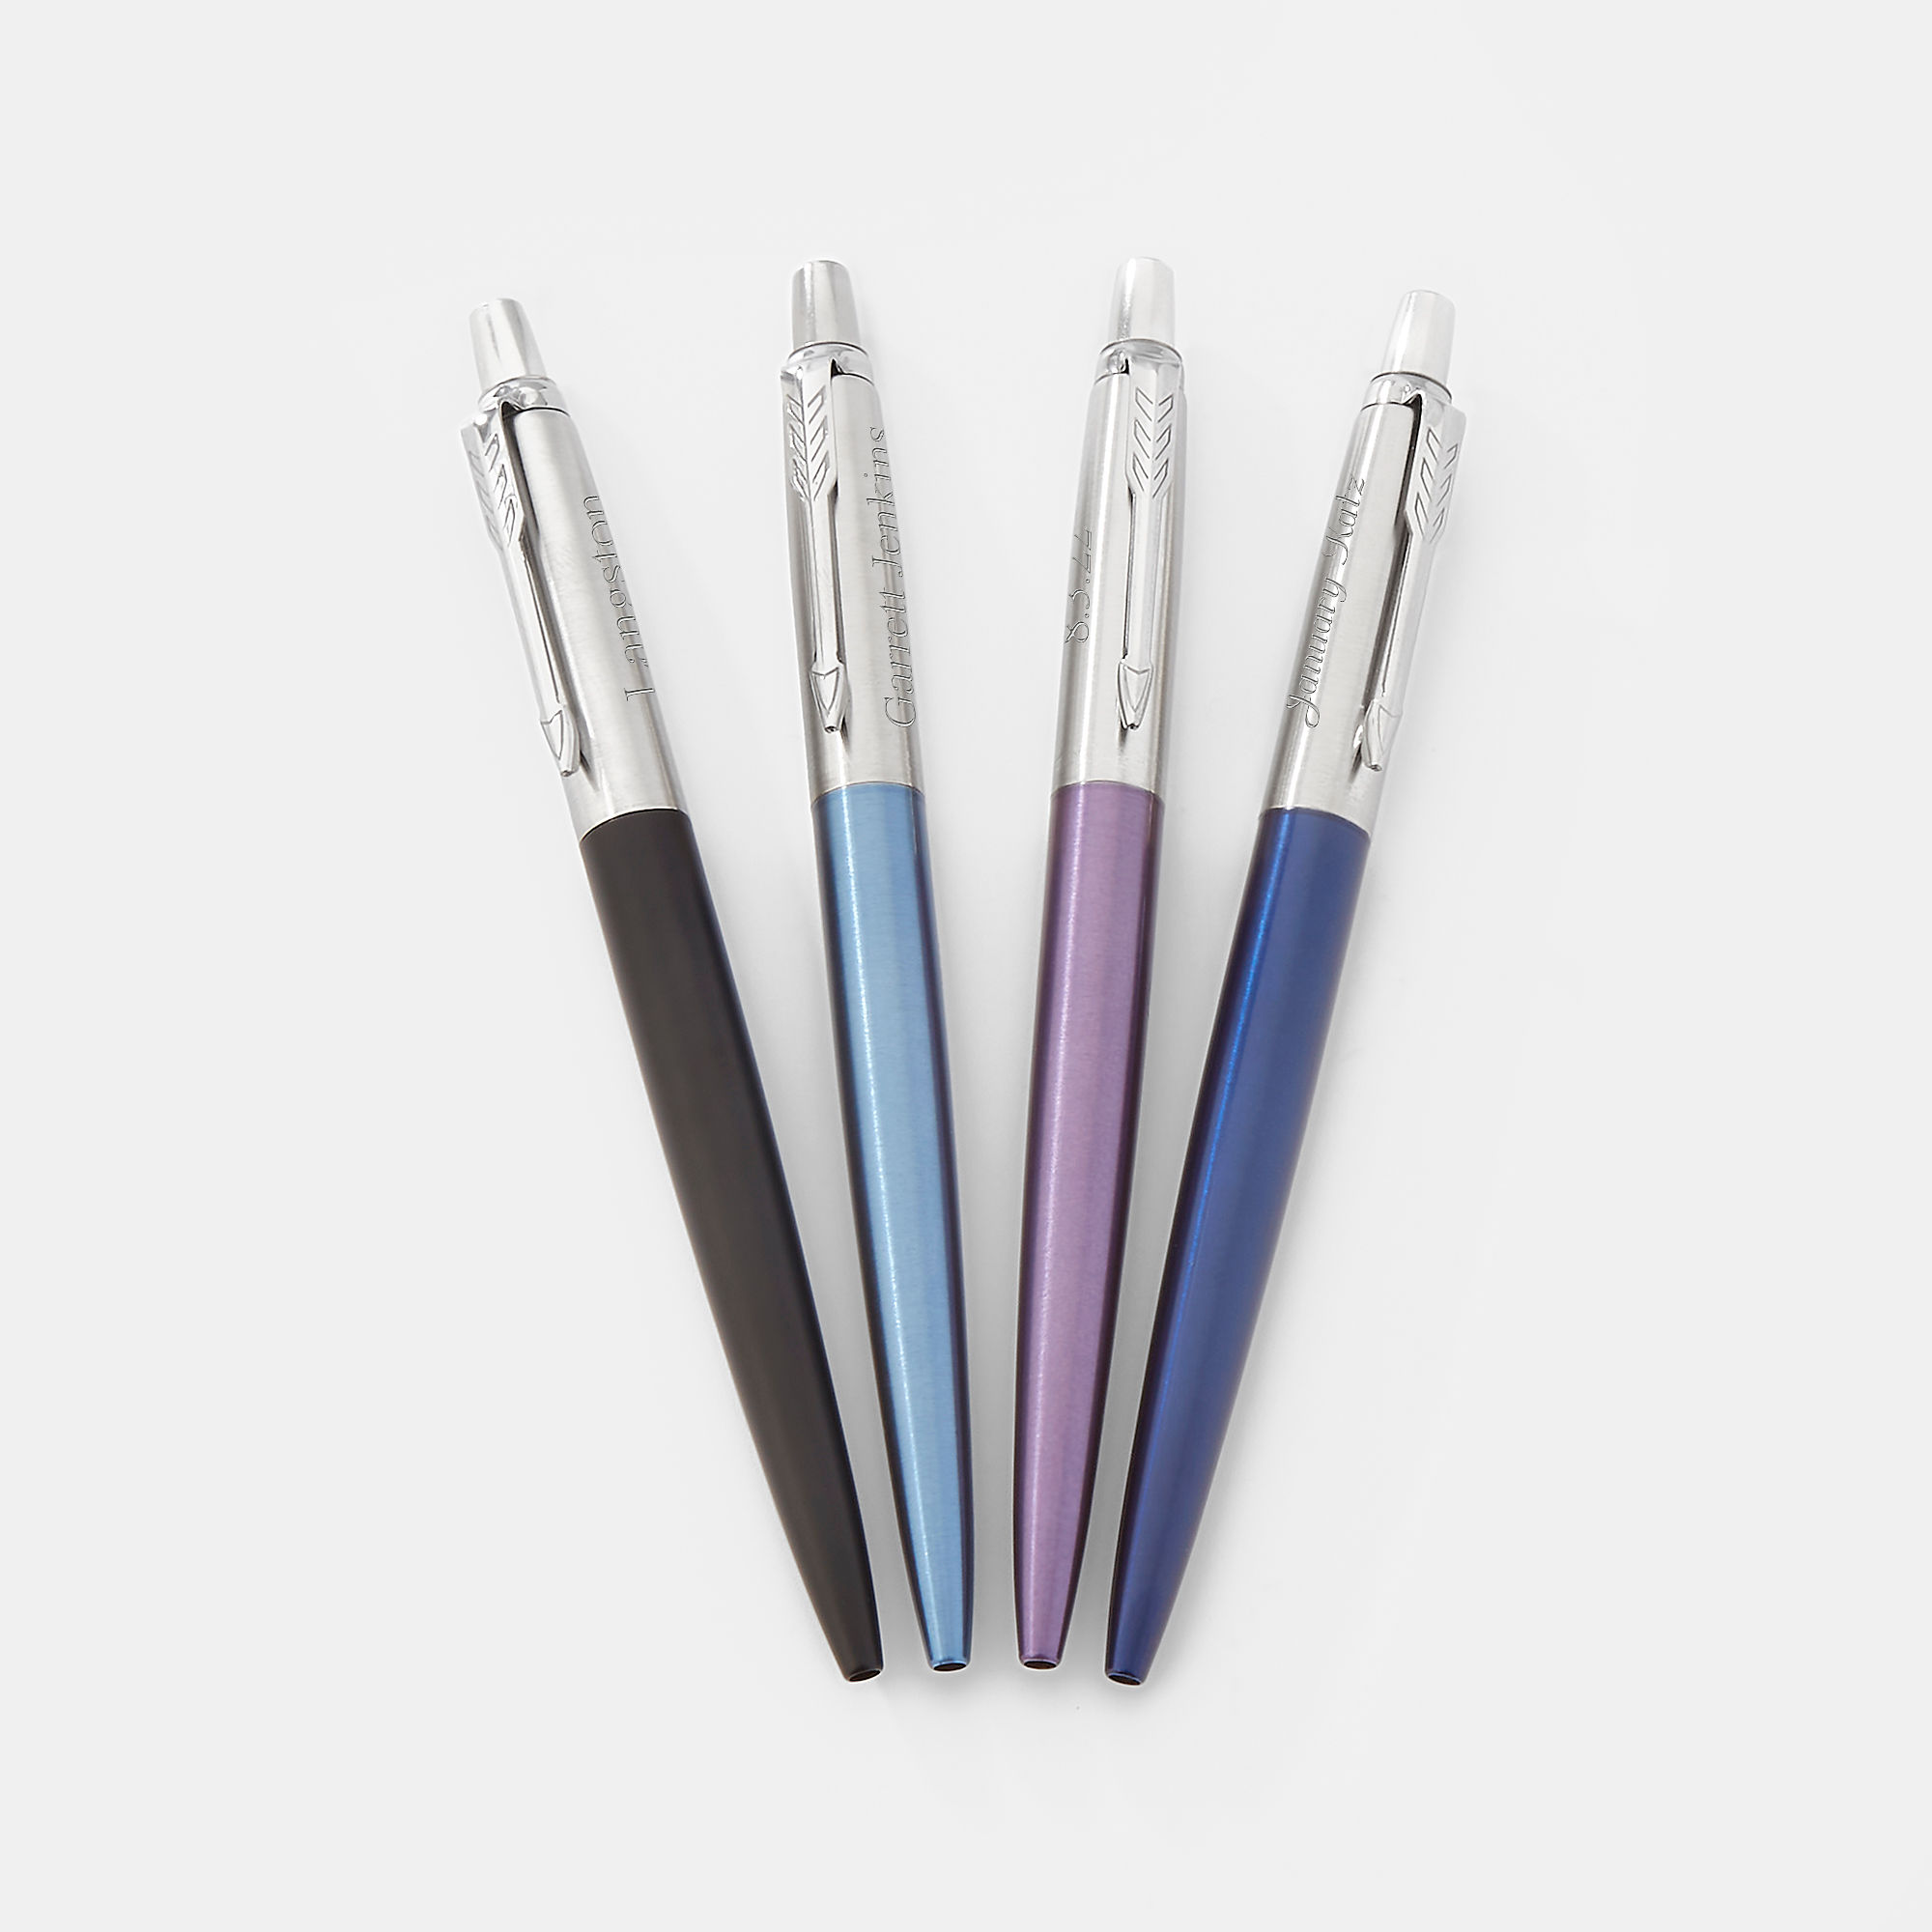 BIG SALE ! Extra GIFT Personalised Engraved PARKER JOTTER Ballpoint Pens 